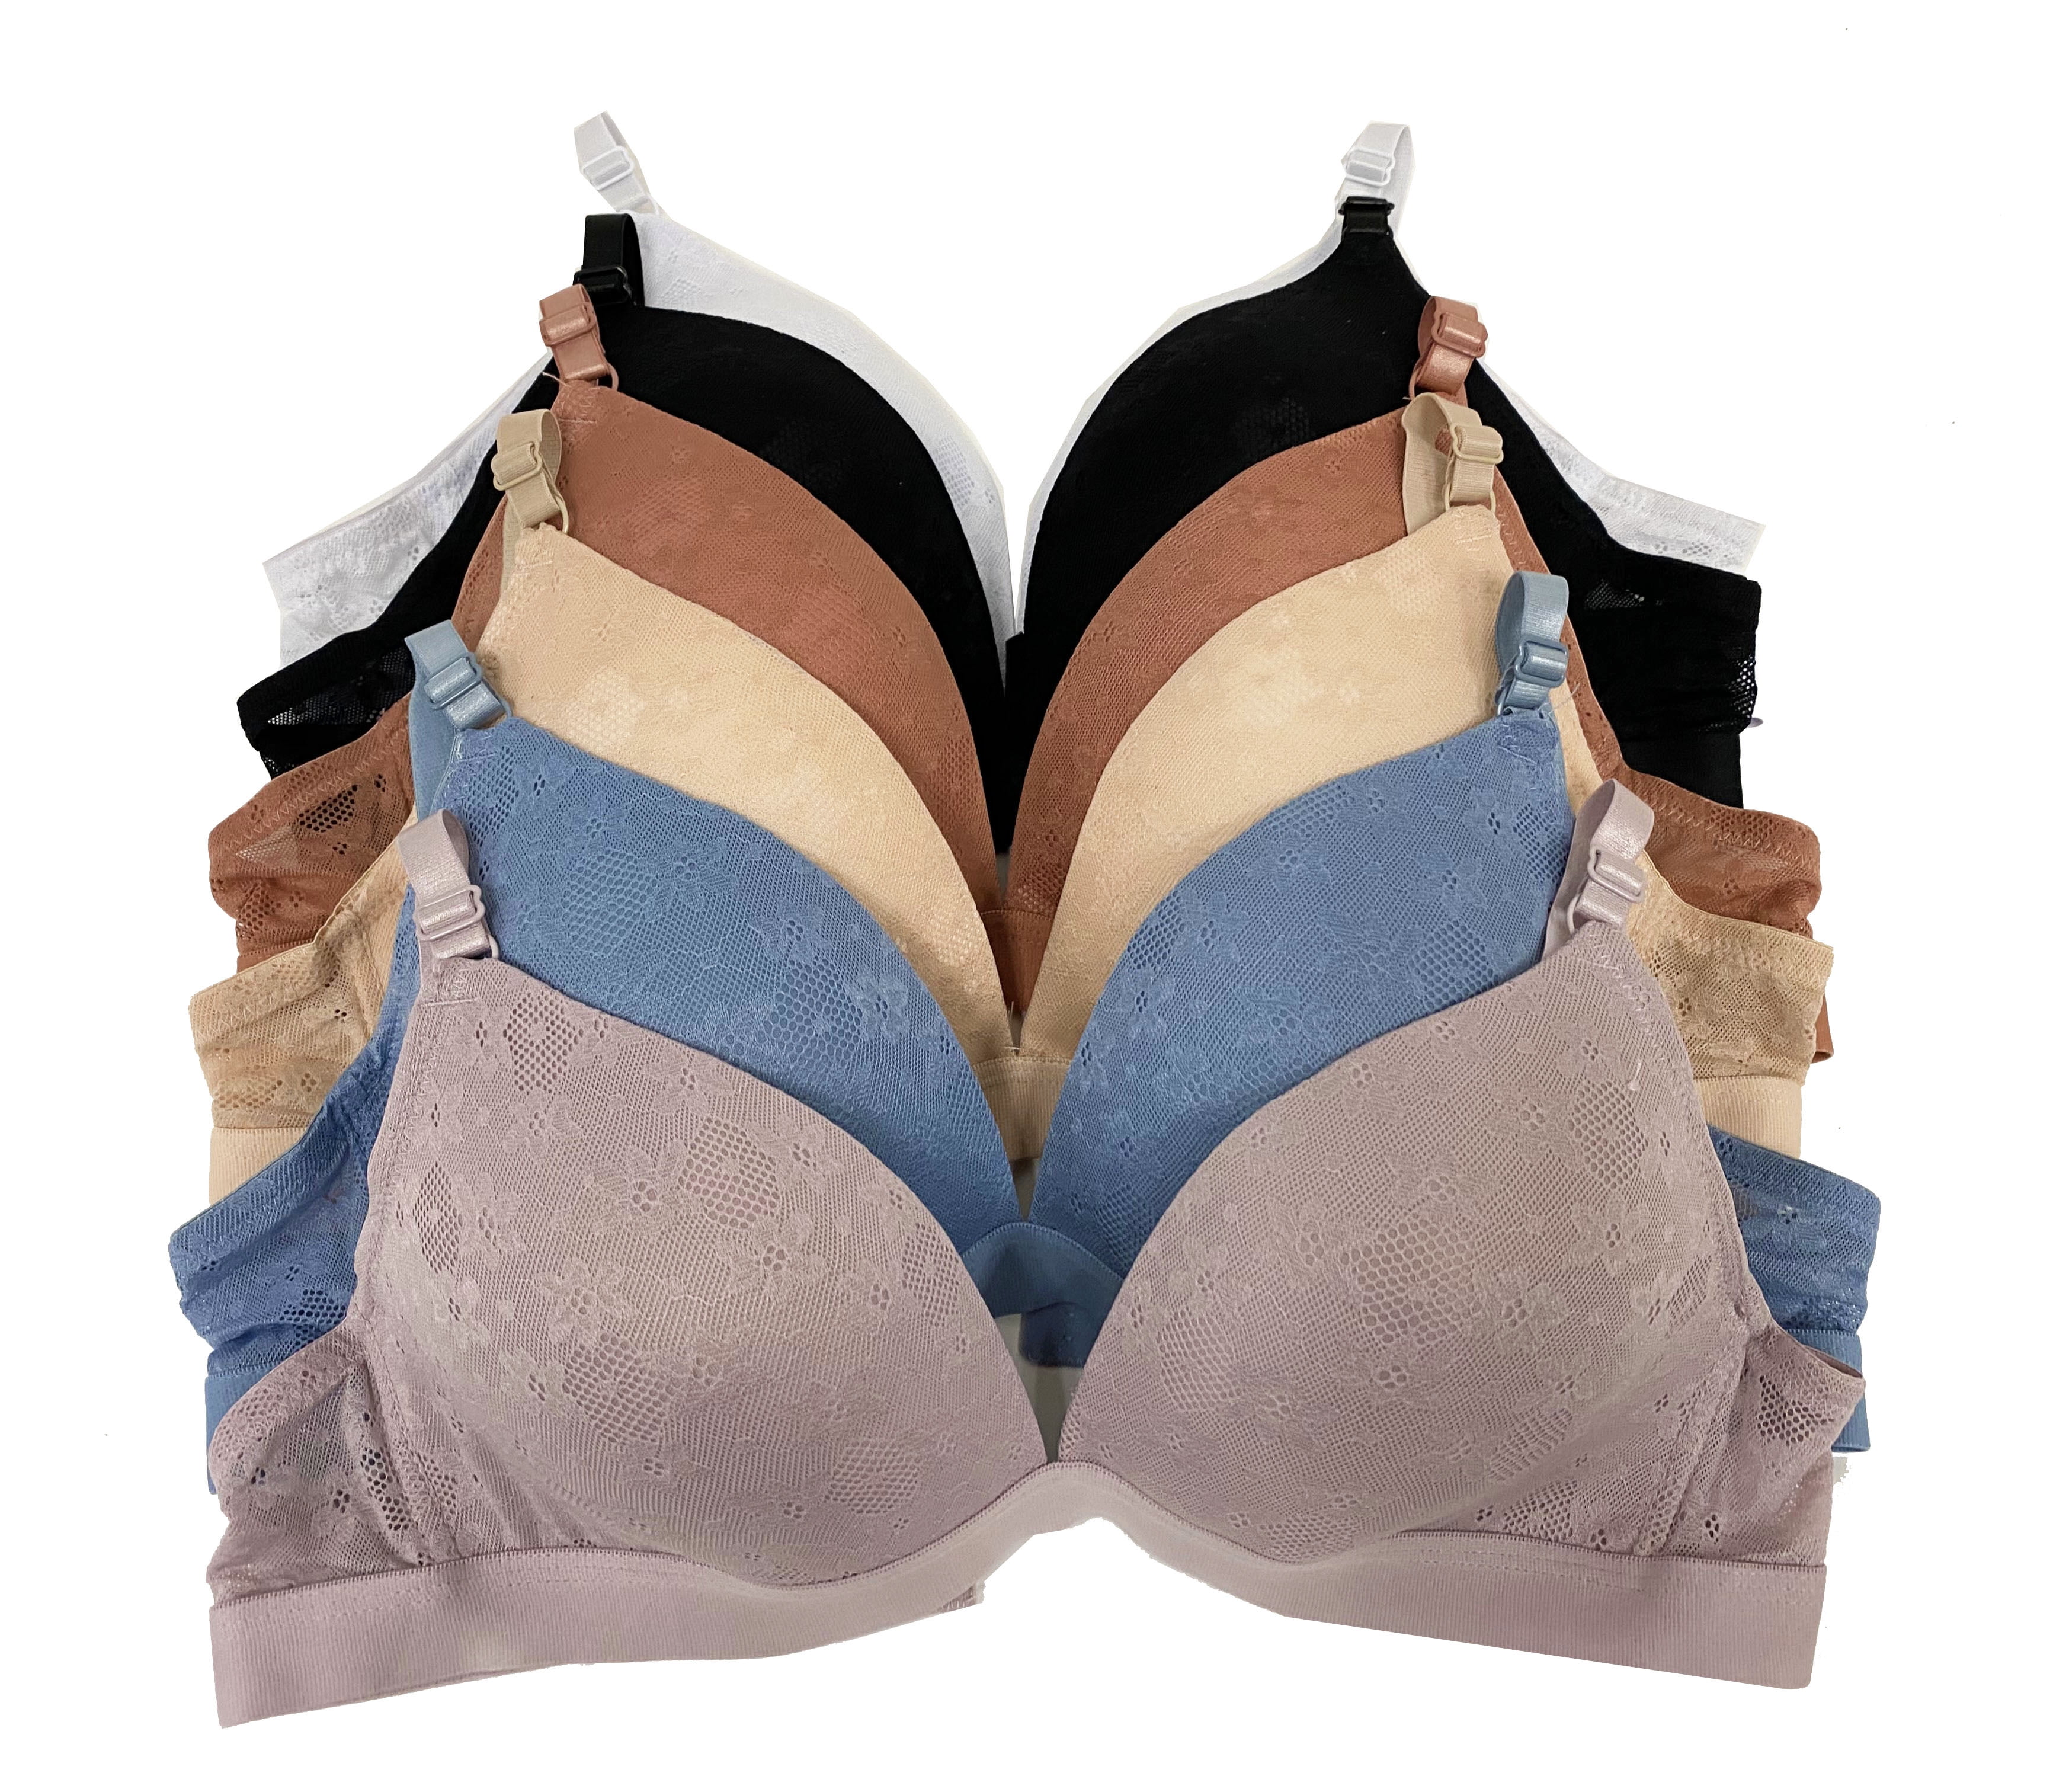 Women Bras 6 pack of Basic No Wire Free Wireless Bra B cup C cup Size 36C  (S6319)